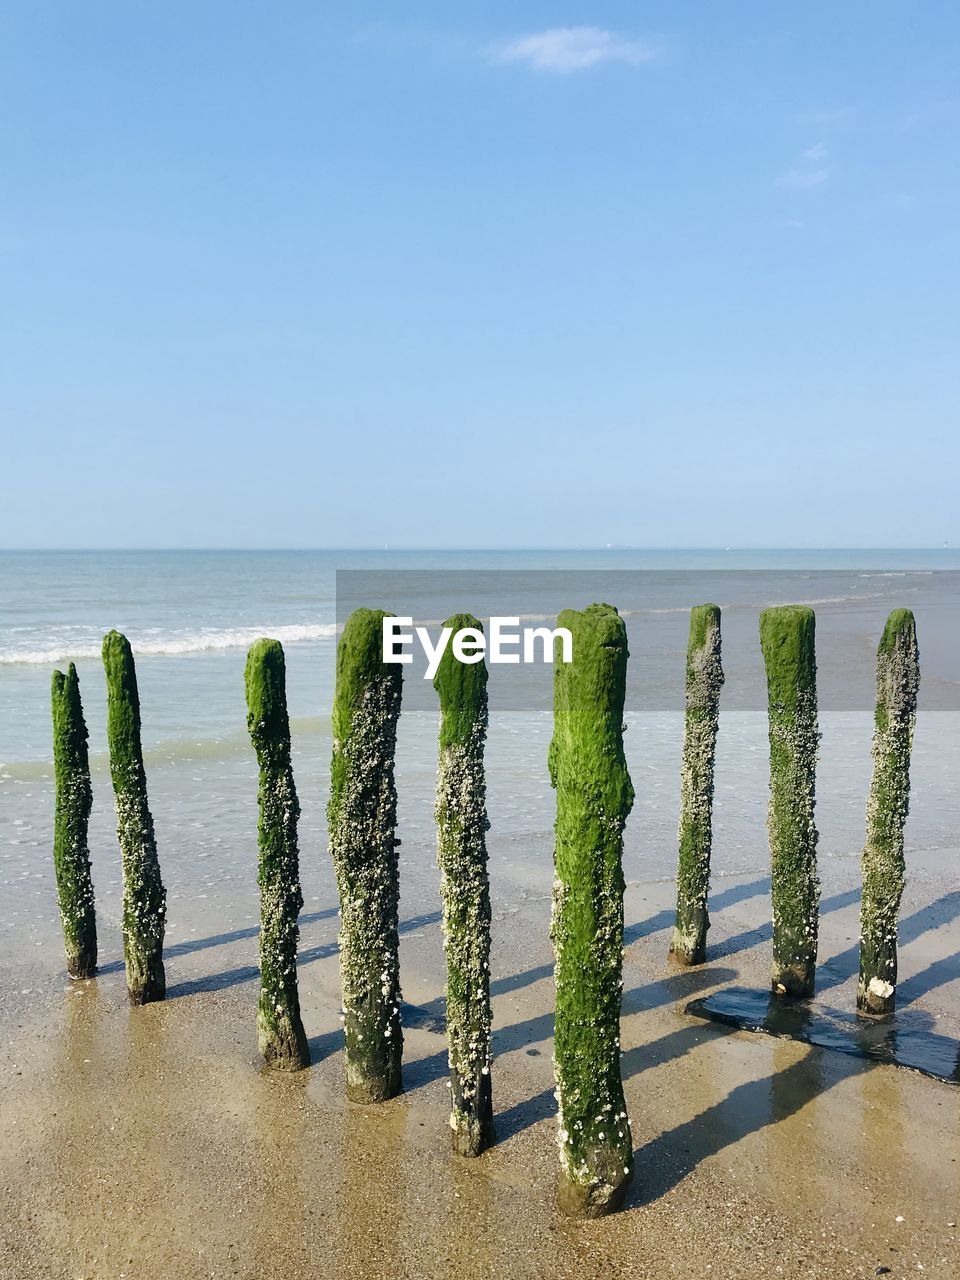 Panoramic view of wooden posts on beach against clear sky